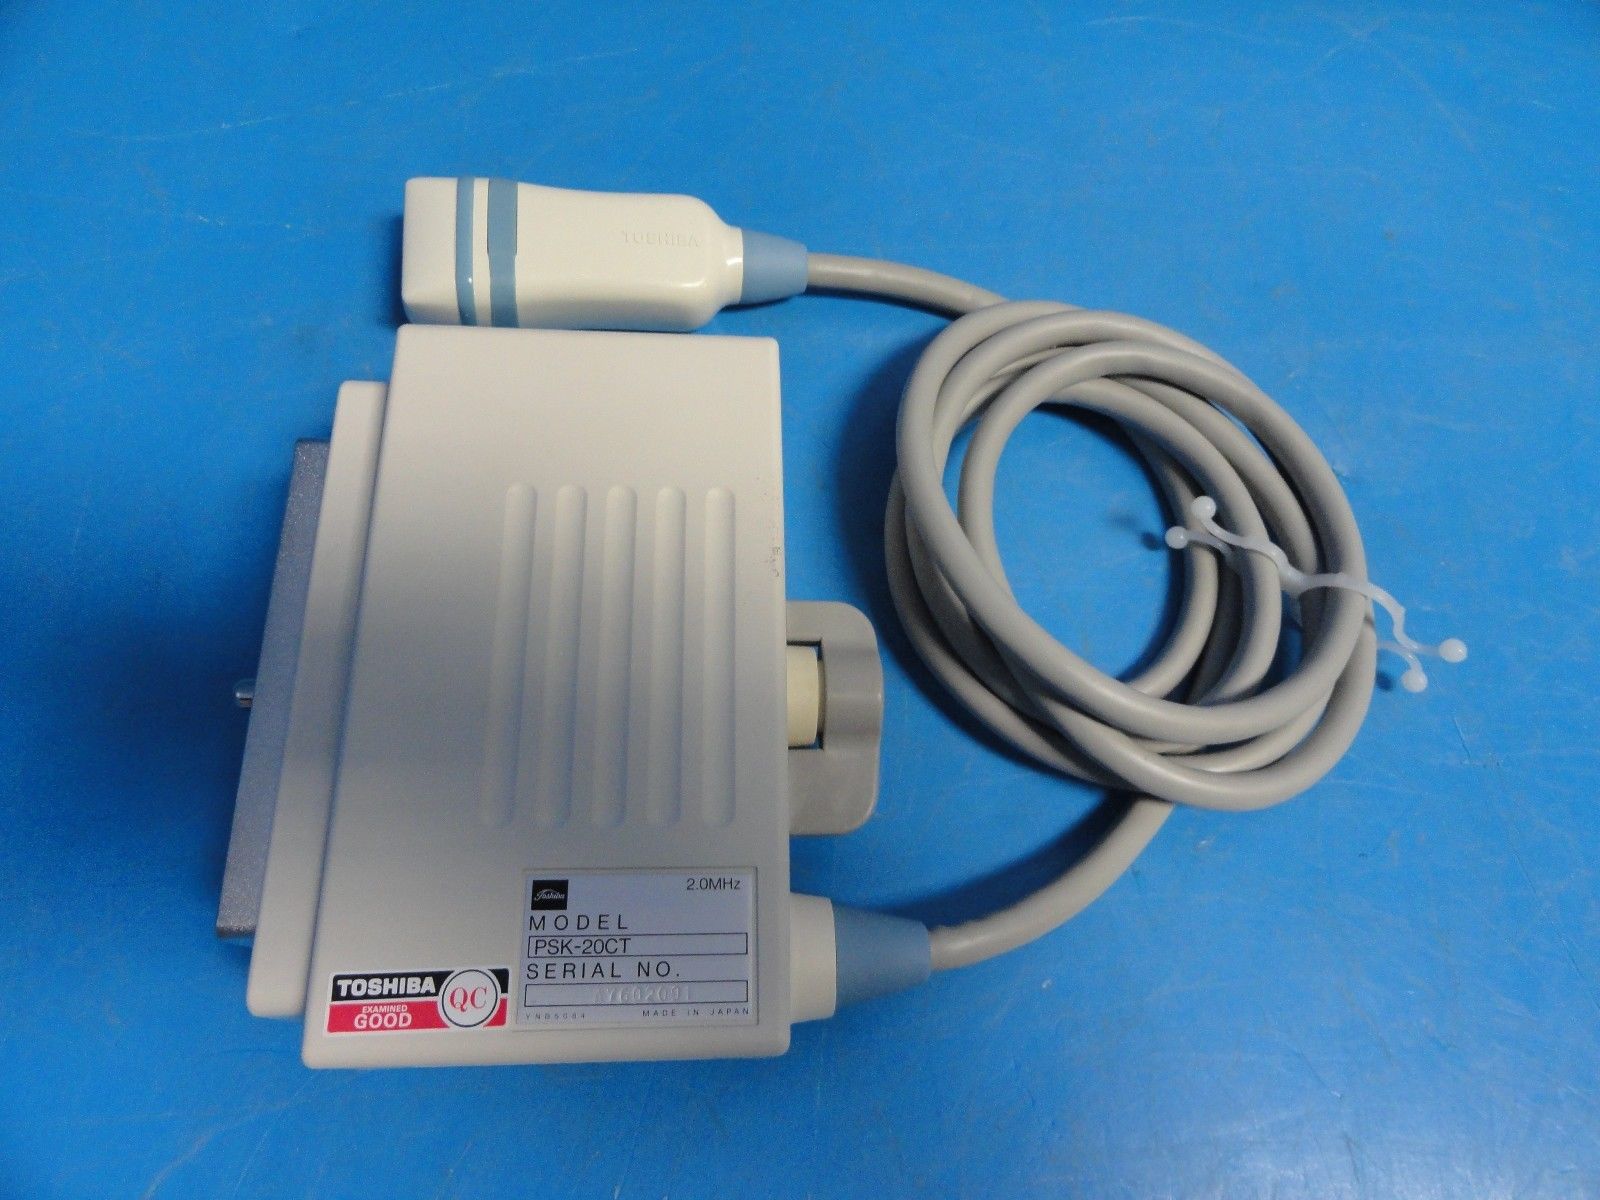 Toshiba PSK-20CT Phased Array Ultrasound Probe for SSA-380 & Powervision (7276) DIAGNOSTIC ULTRASOUND MACHINES FOR SALE